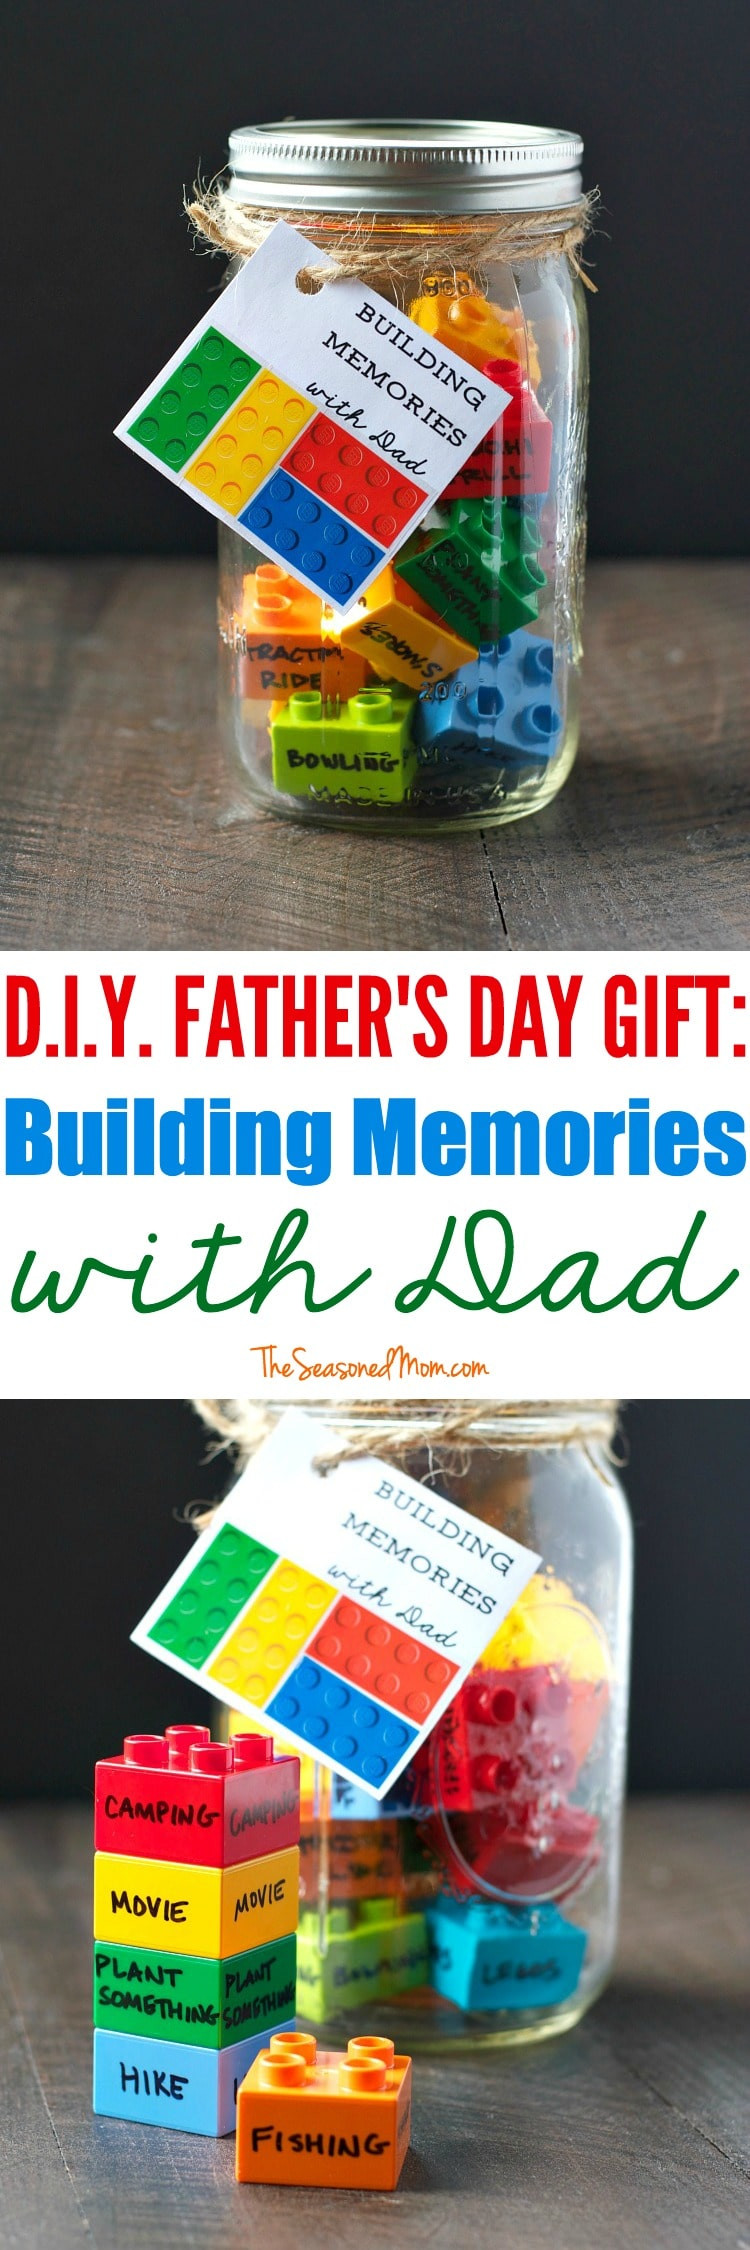 Gift Ideas For Dad From Kids
 25 Homemade Father s Day Gifts from Kids That Dad Can